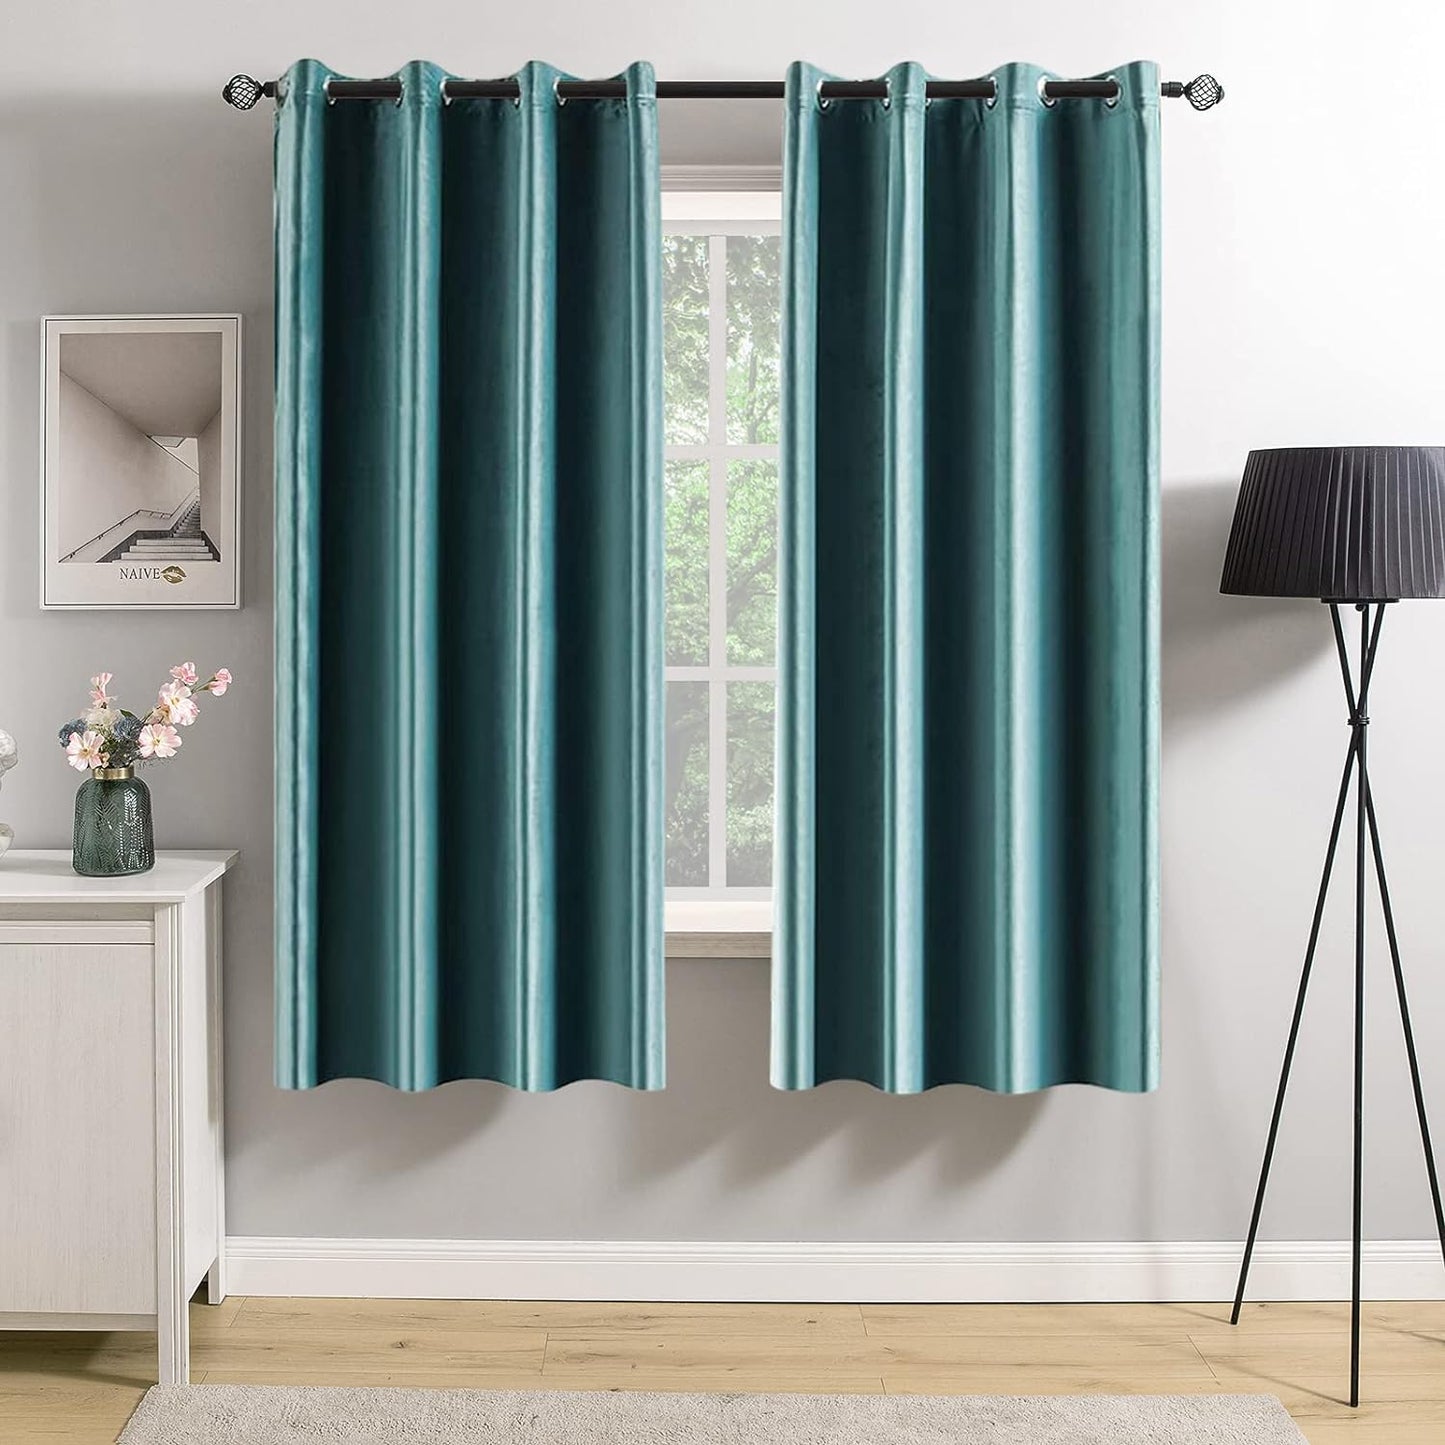 MIULEE Velvet Curtains Olive Green Elegant Grommet Curtains Thermal Insulated Soundproof Room Darkening Curtains/Drapes for Classical Living Room Bedroom Decor 52 X 84 Inch Set of 2  MIULEE Teal W52 X L63 